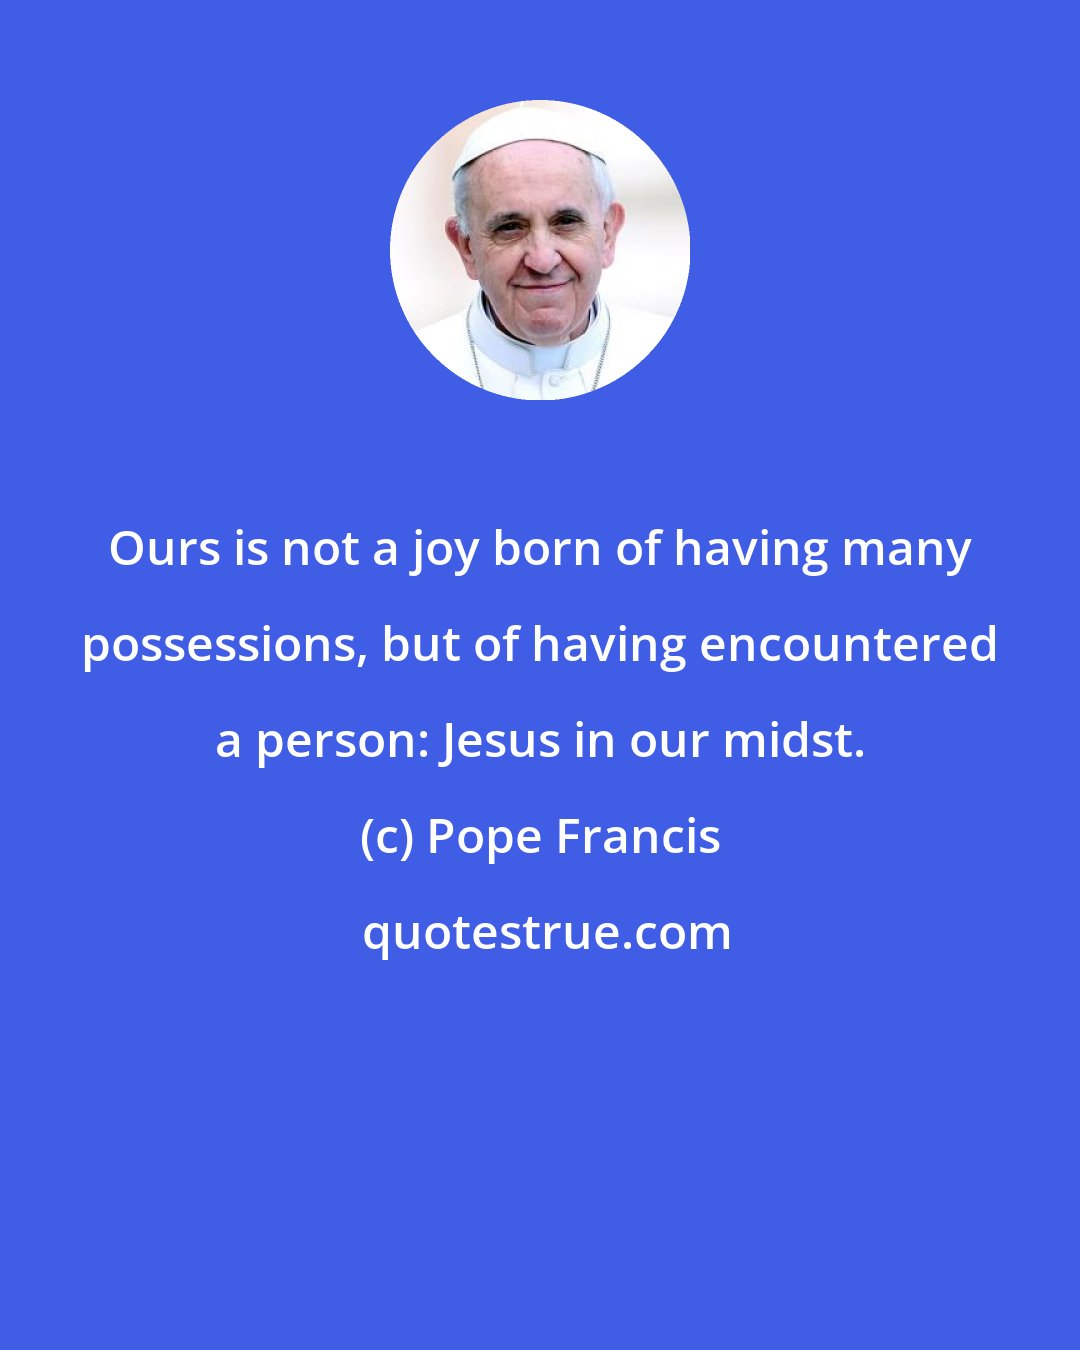 Pope Francis: Ours is not a joy born of having many possessions, but of having encountered a person: Jesus in our midst.